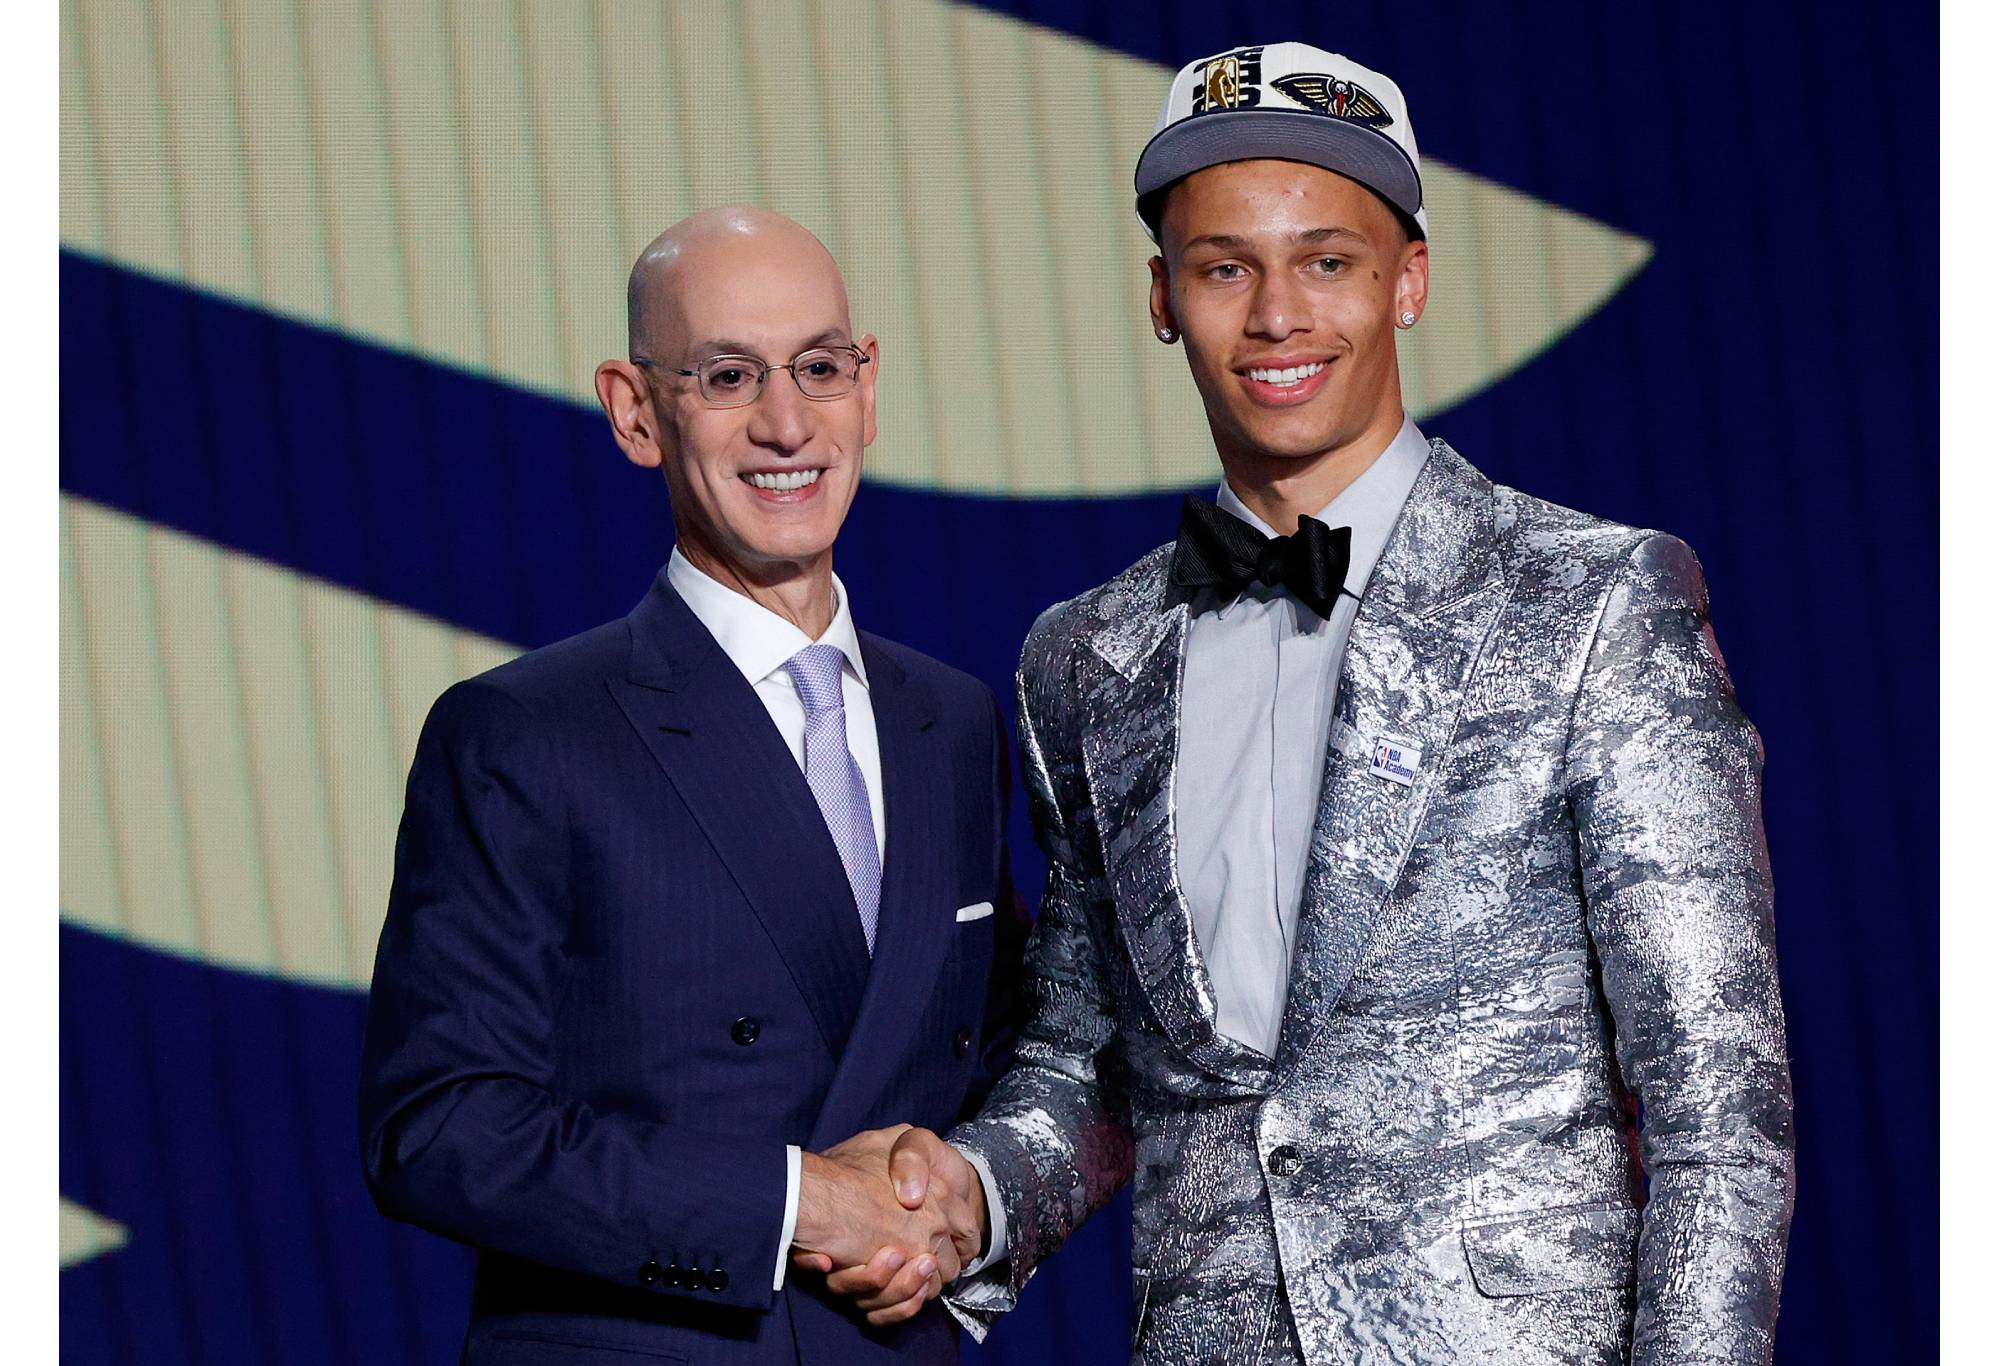 NEW YORK, NEW YORK - JUNE 23: NBA commissioner Adam Silver (L) and Dyson Daniels pose for photos after Daniels was drafted with the 8th overall pick by the New Orleans Pelicans during the 2022 NBA Draft at Barclays Center on June 23, 2022 in New York City. NOTE TO USER: User expressly acknowledges and agrees that, by downloading and or using this photograph, User is consenting to the terms and conditions of the Getty Images License Agreement. (Photo by Sarah Stier/Getty Images)